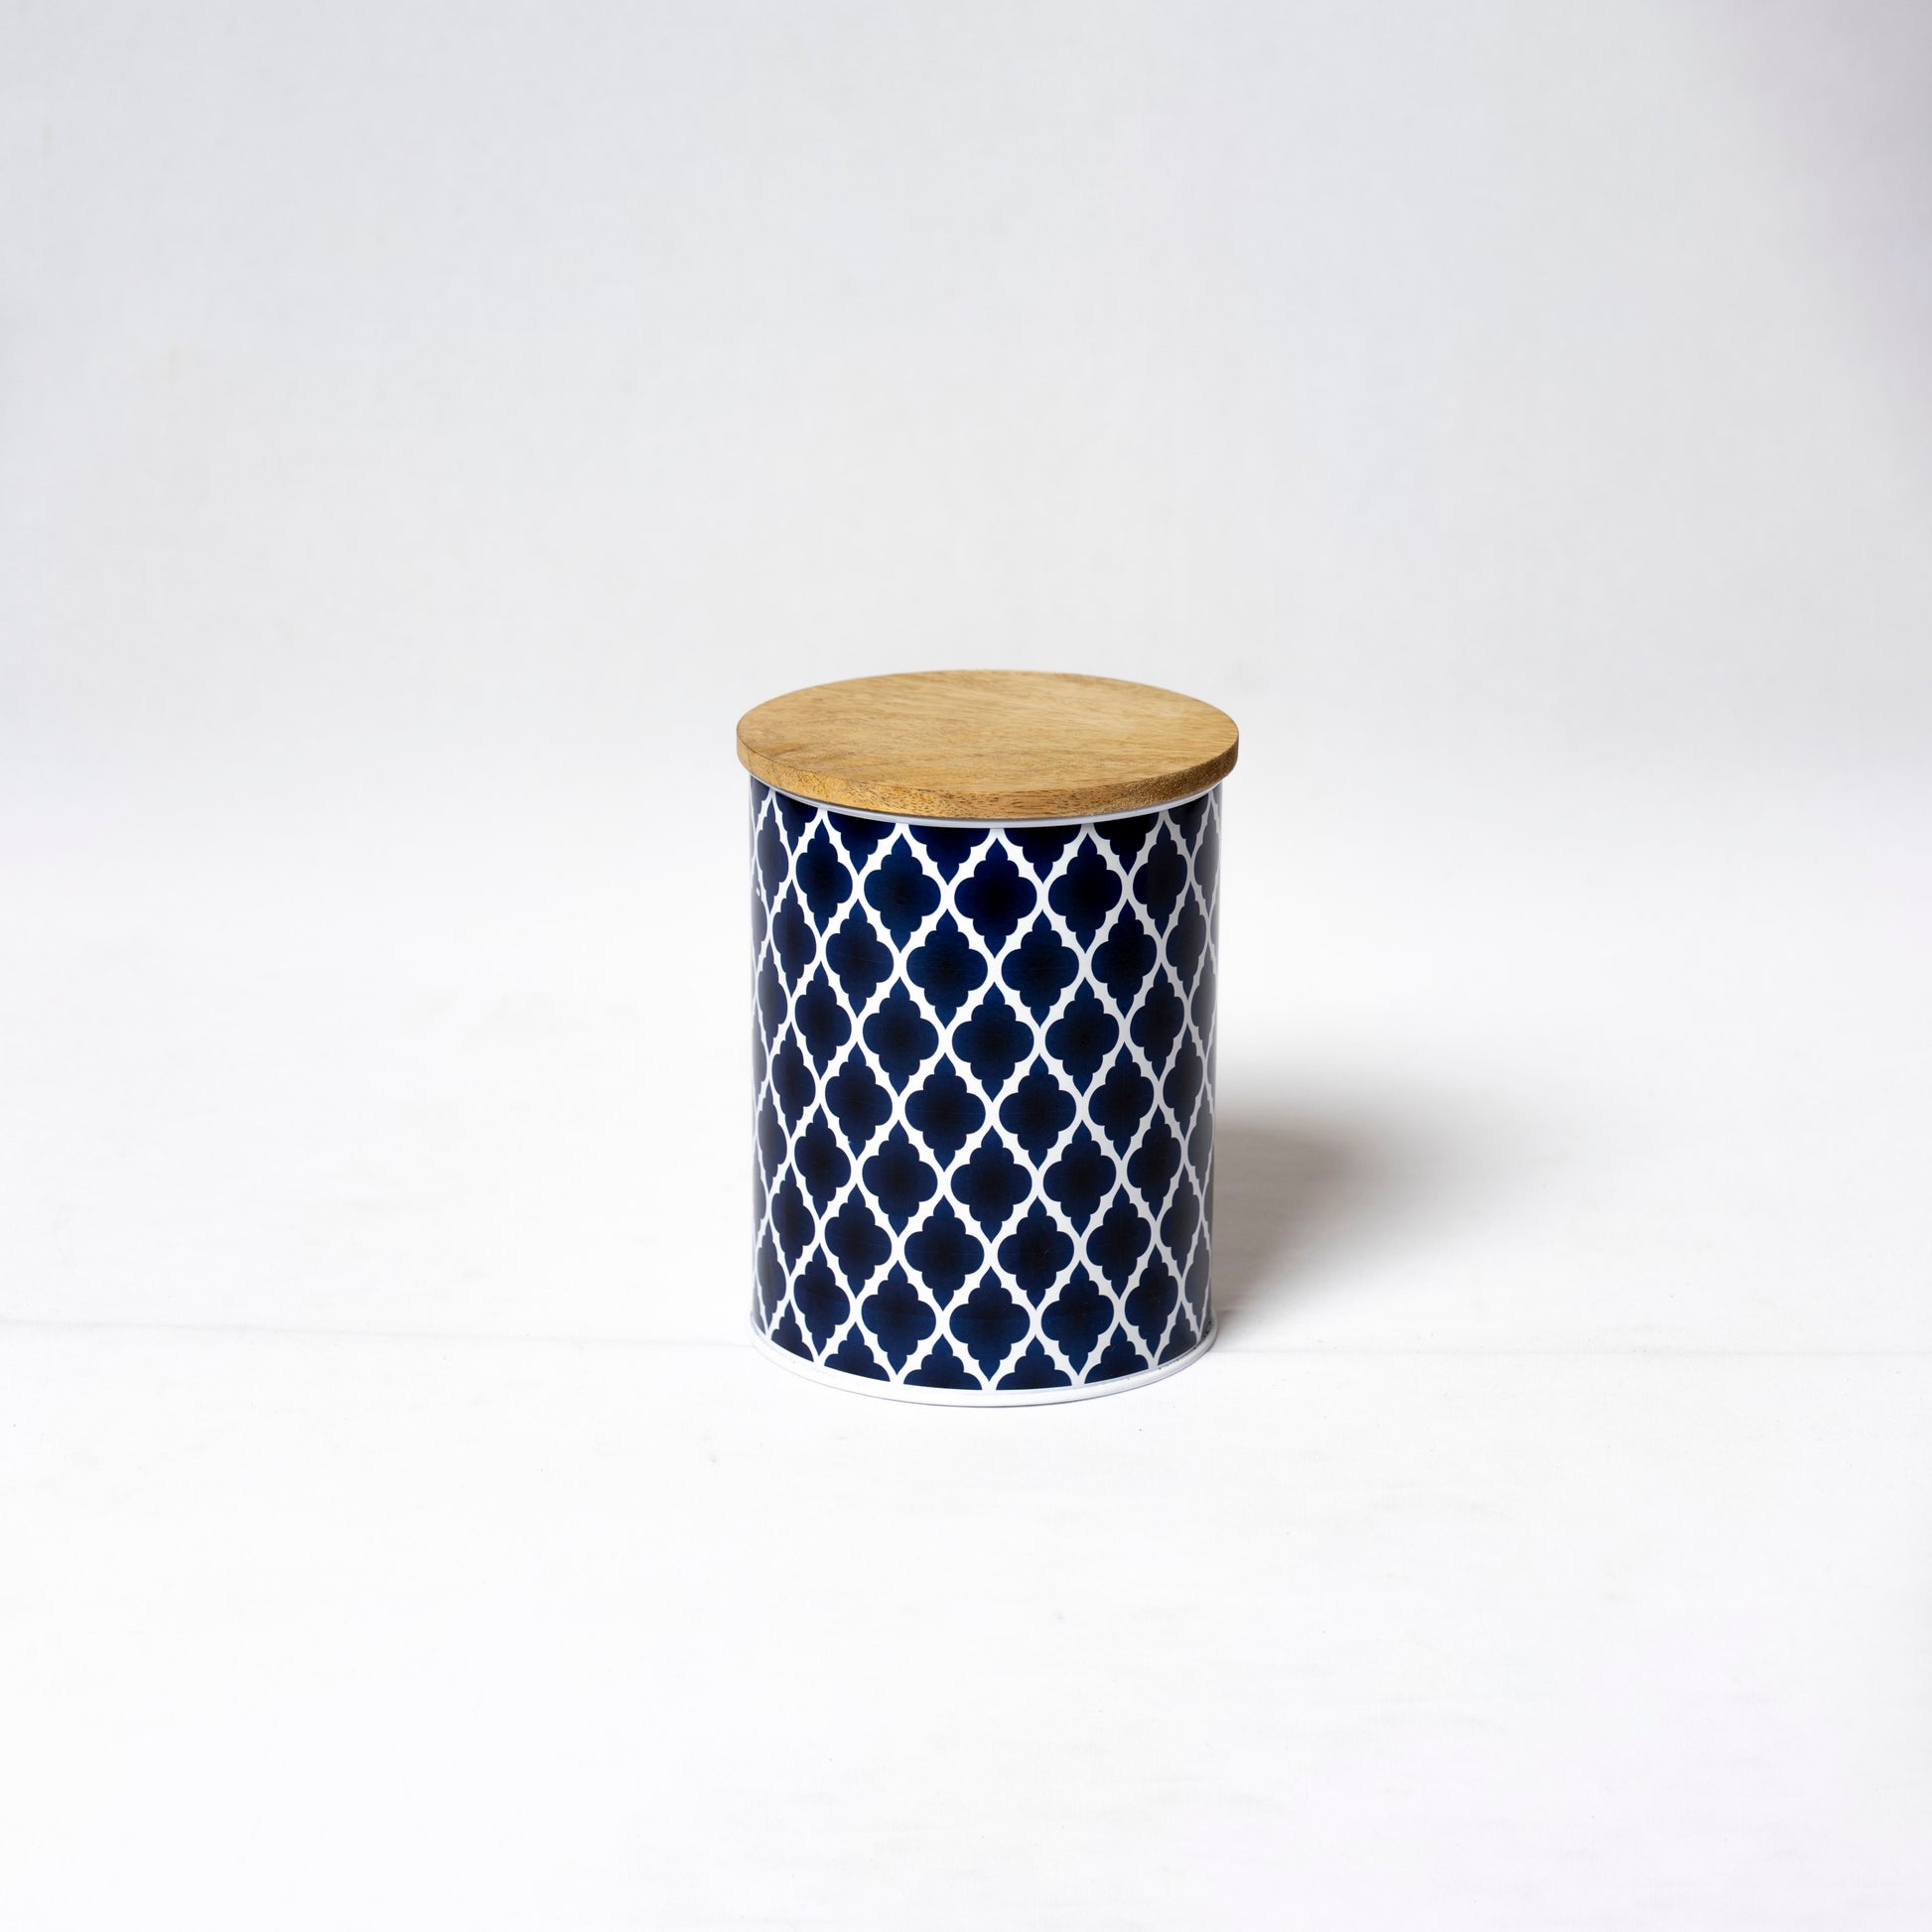 Steel Container with Wooden Lid - Large (Blue) - SCST0007 - View 2